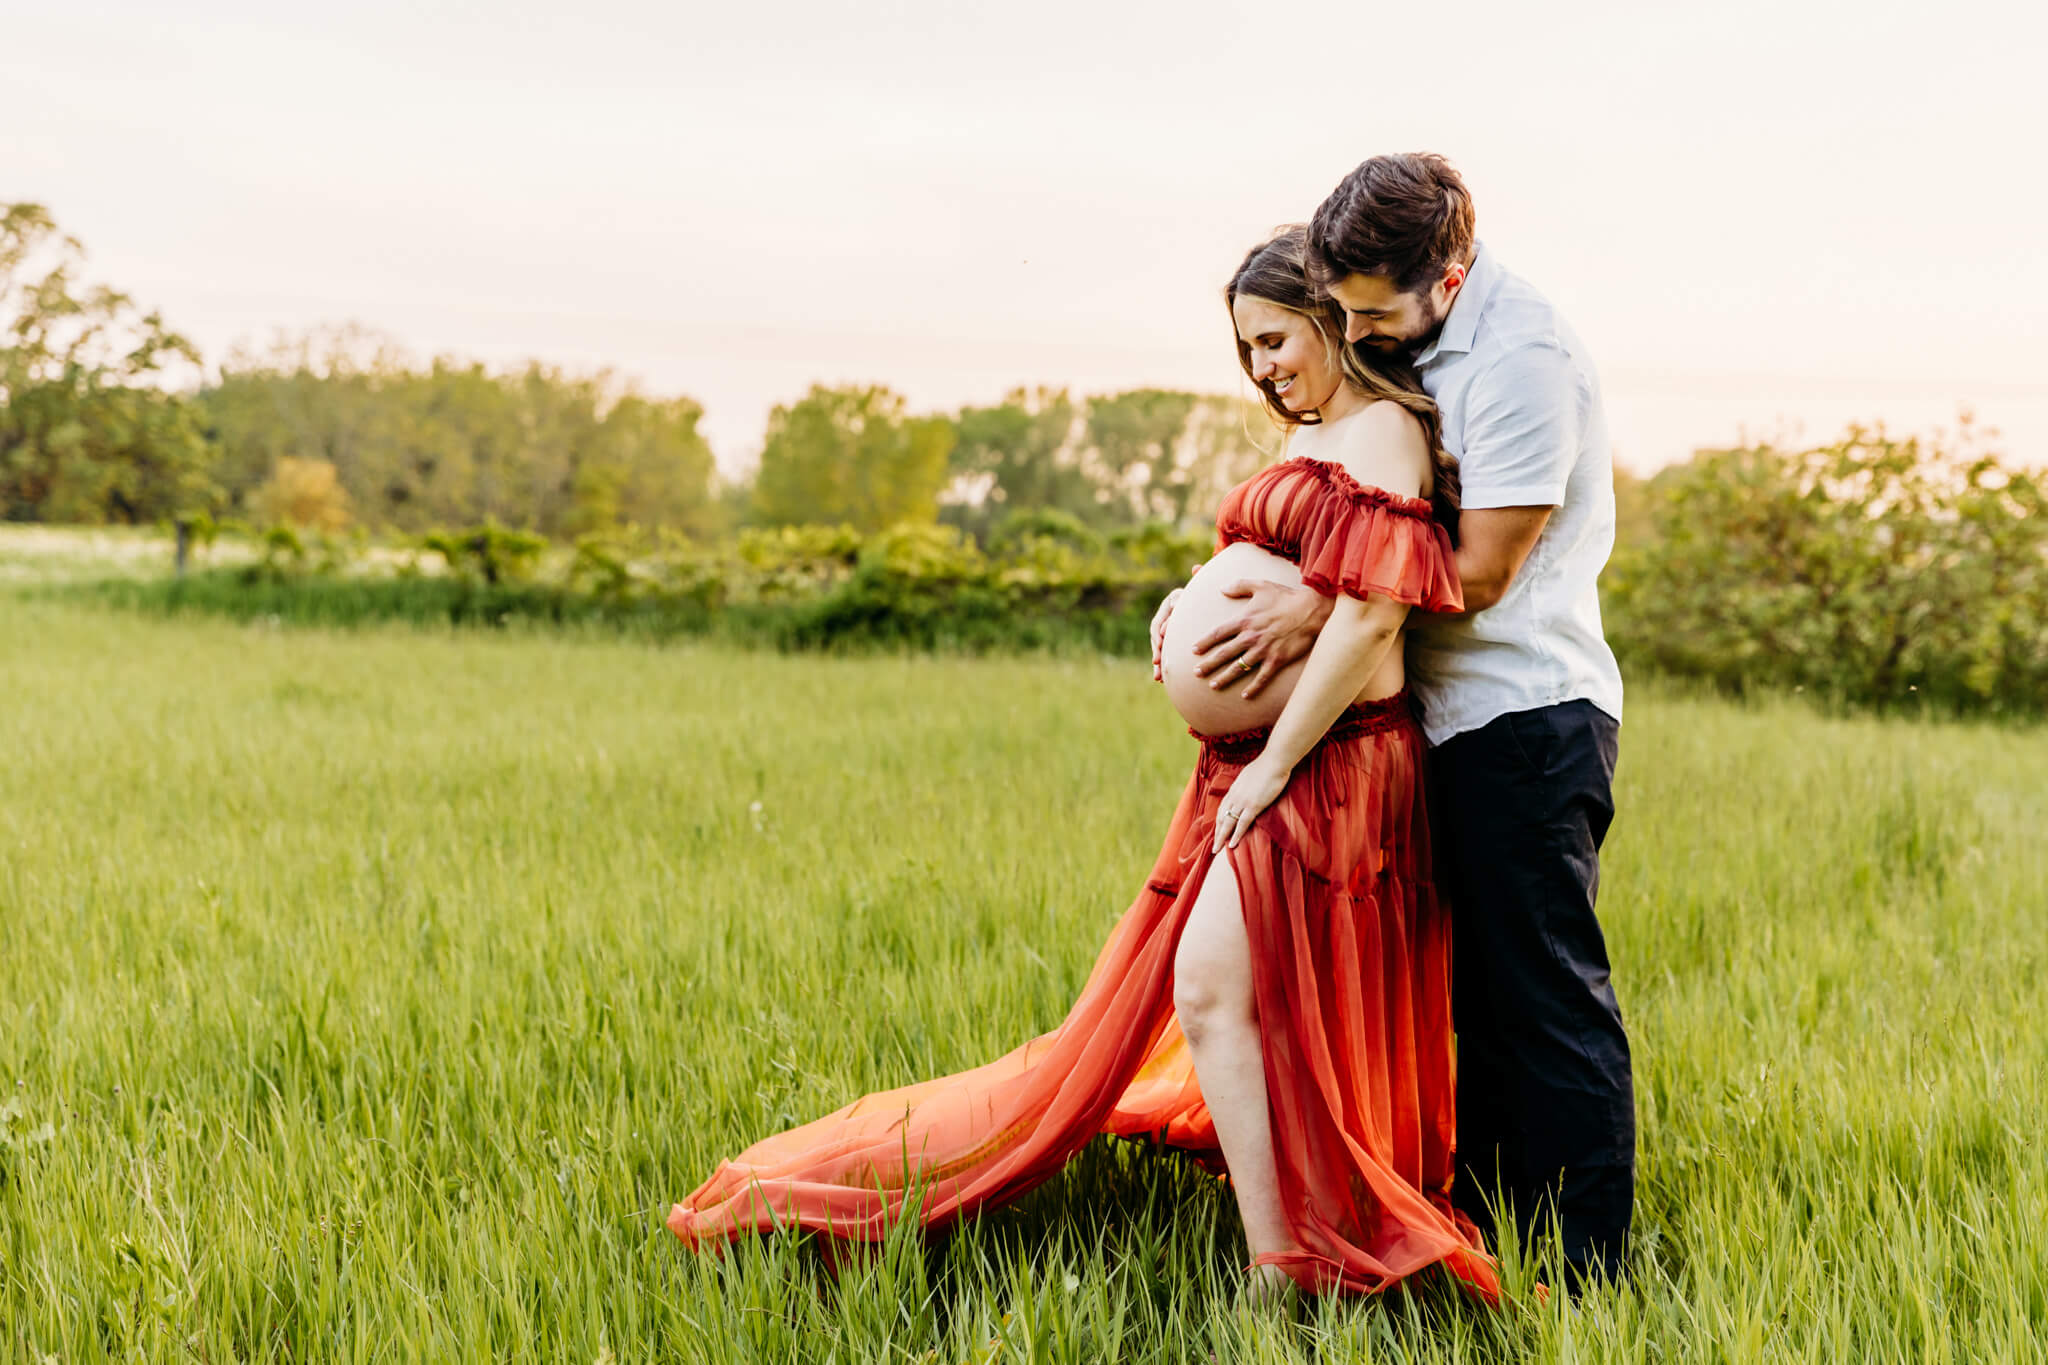 husband holding his wife and wrapping arms around her baby bump as they laugh together in a grassy field for blog about Mothering the Mother